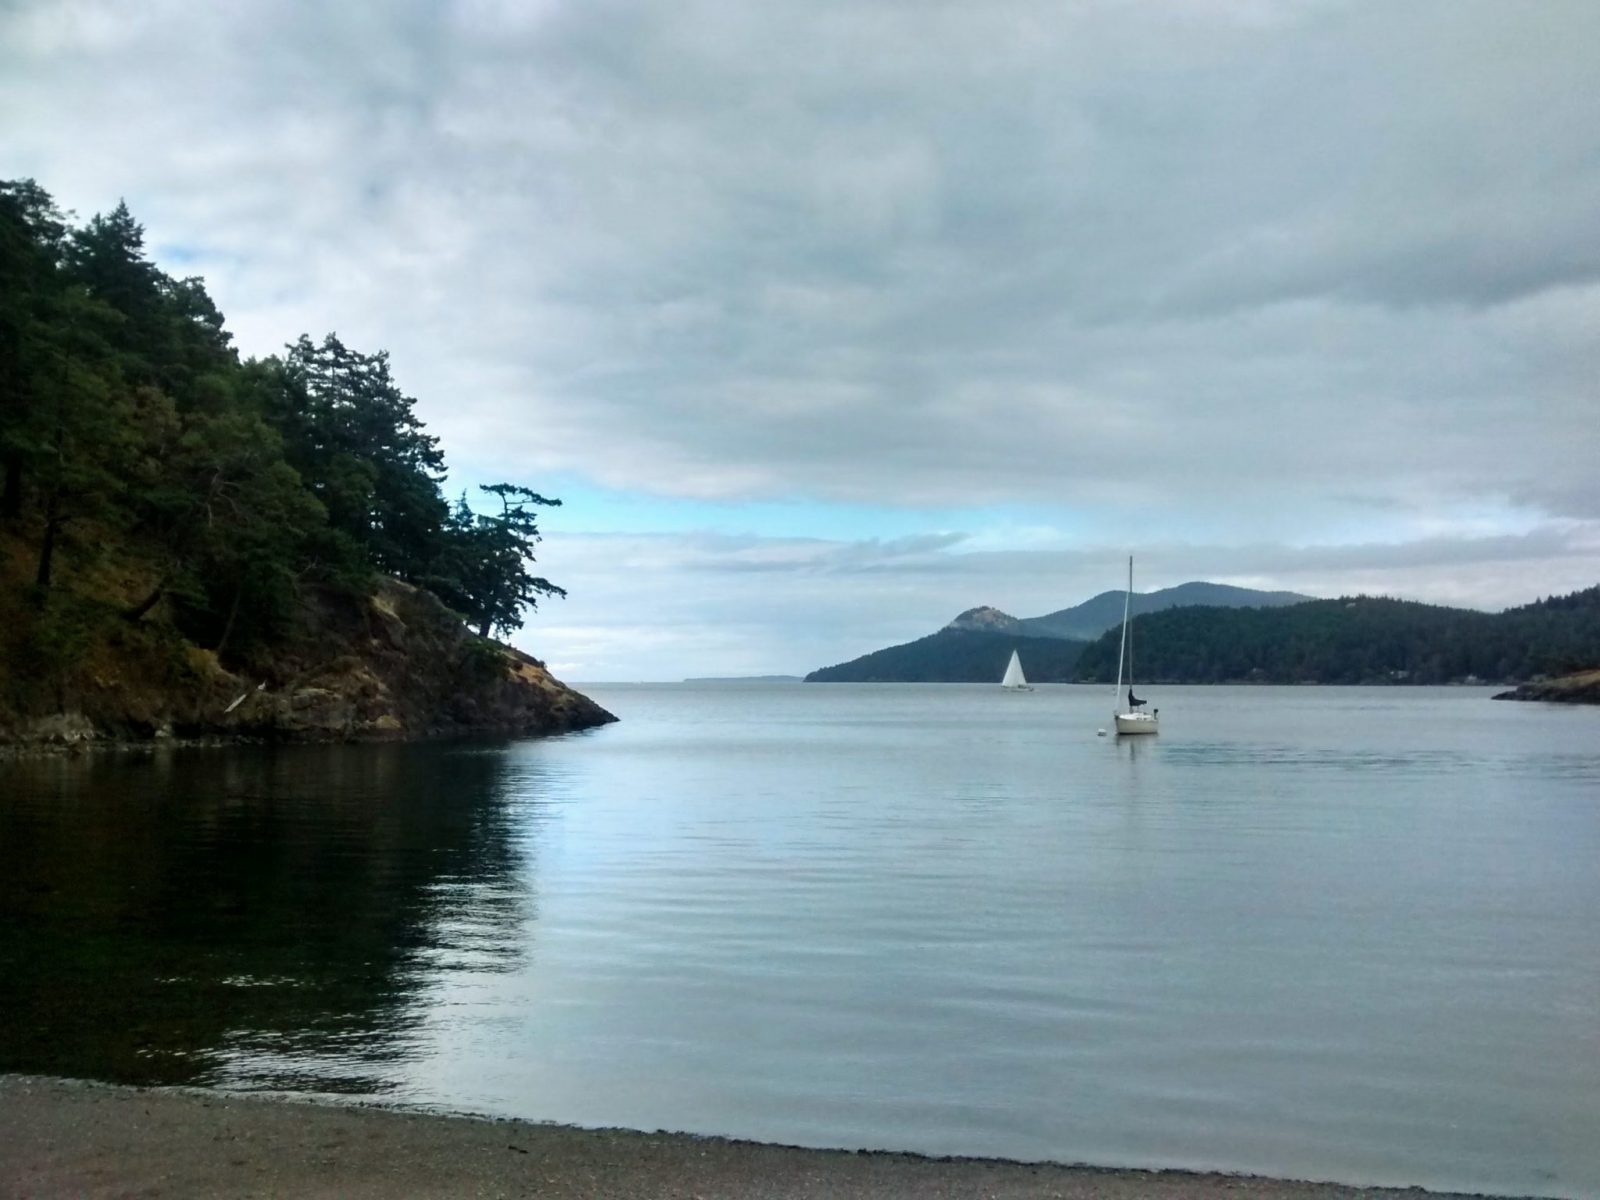 A sailboat at anchor in a small bay. The bay is surrounded by forested hillsides and a gravel beach on a cloudy day